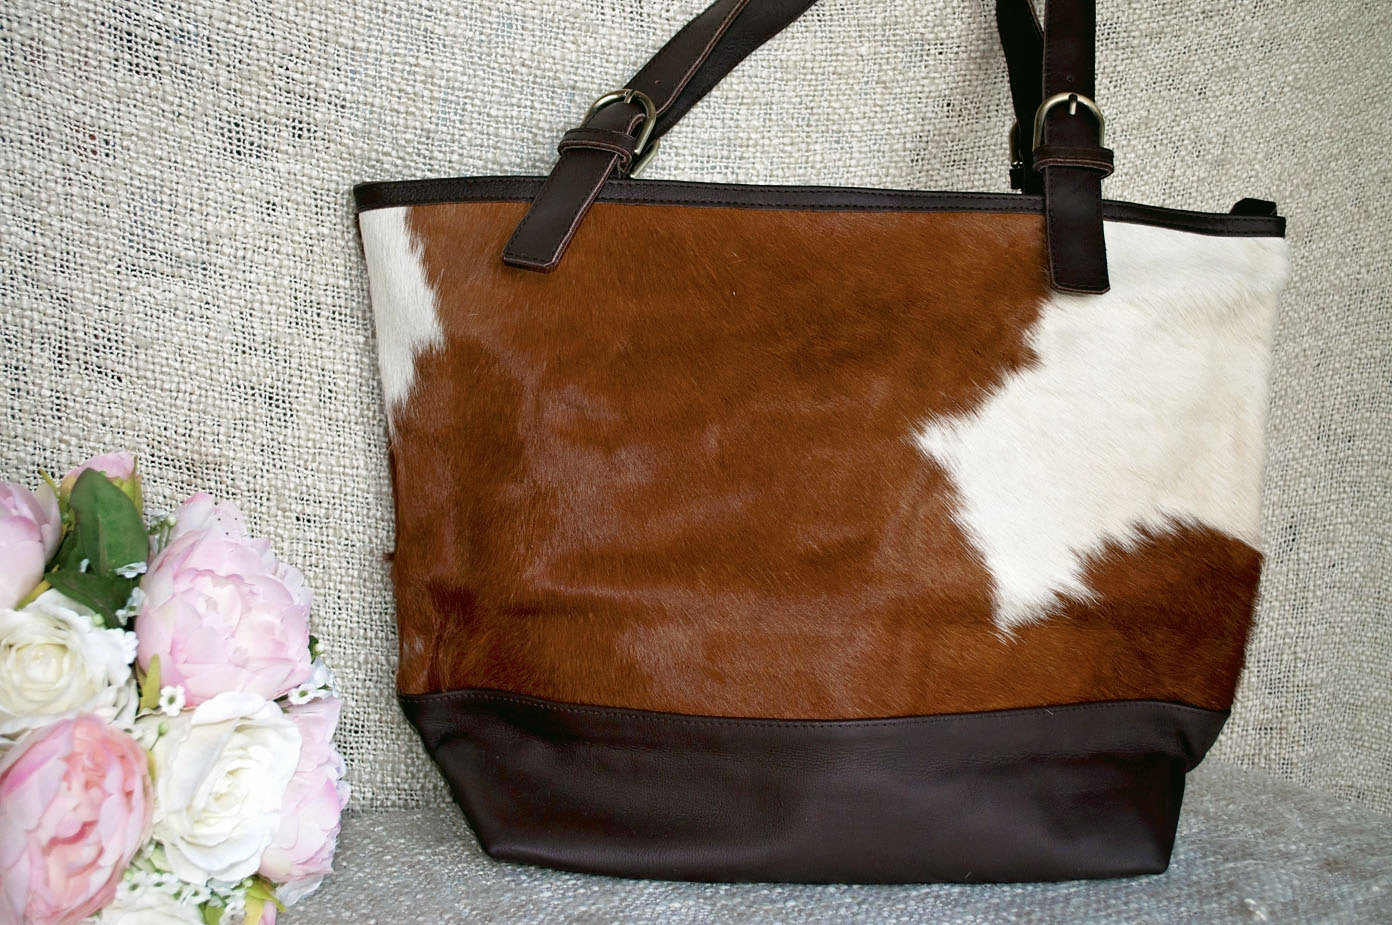 Toolong Tote ~ Brown & White Collection